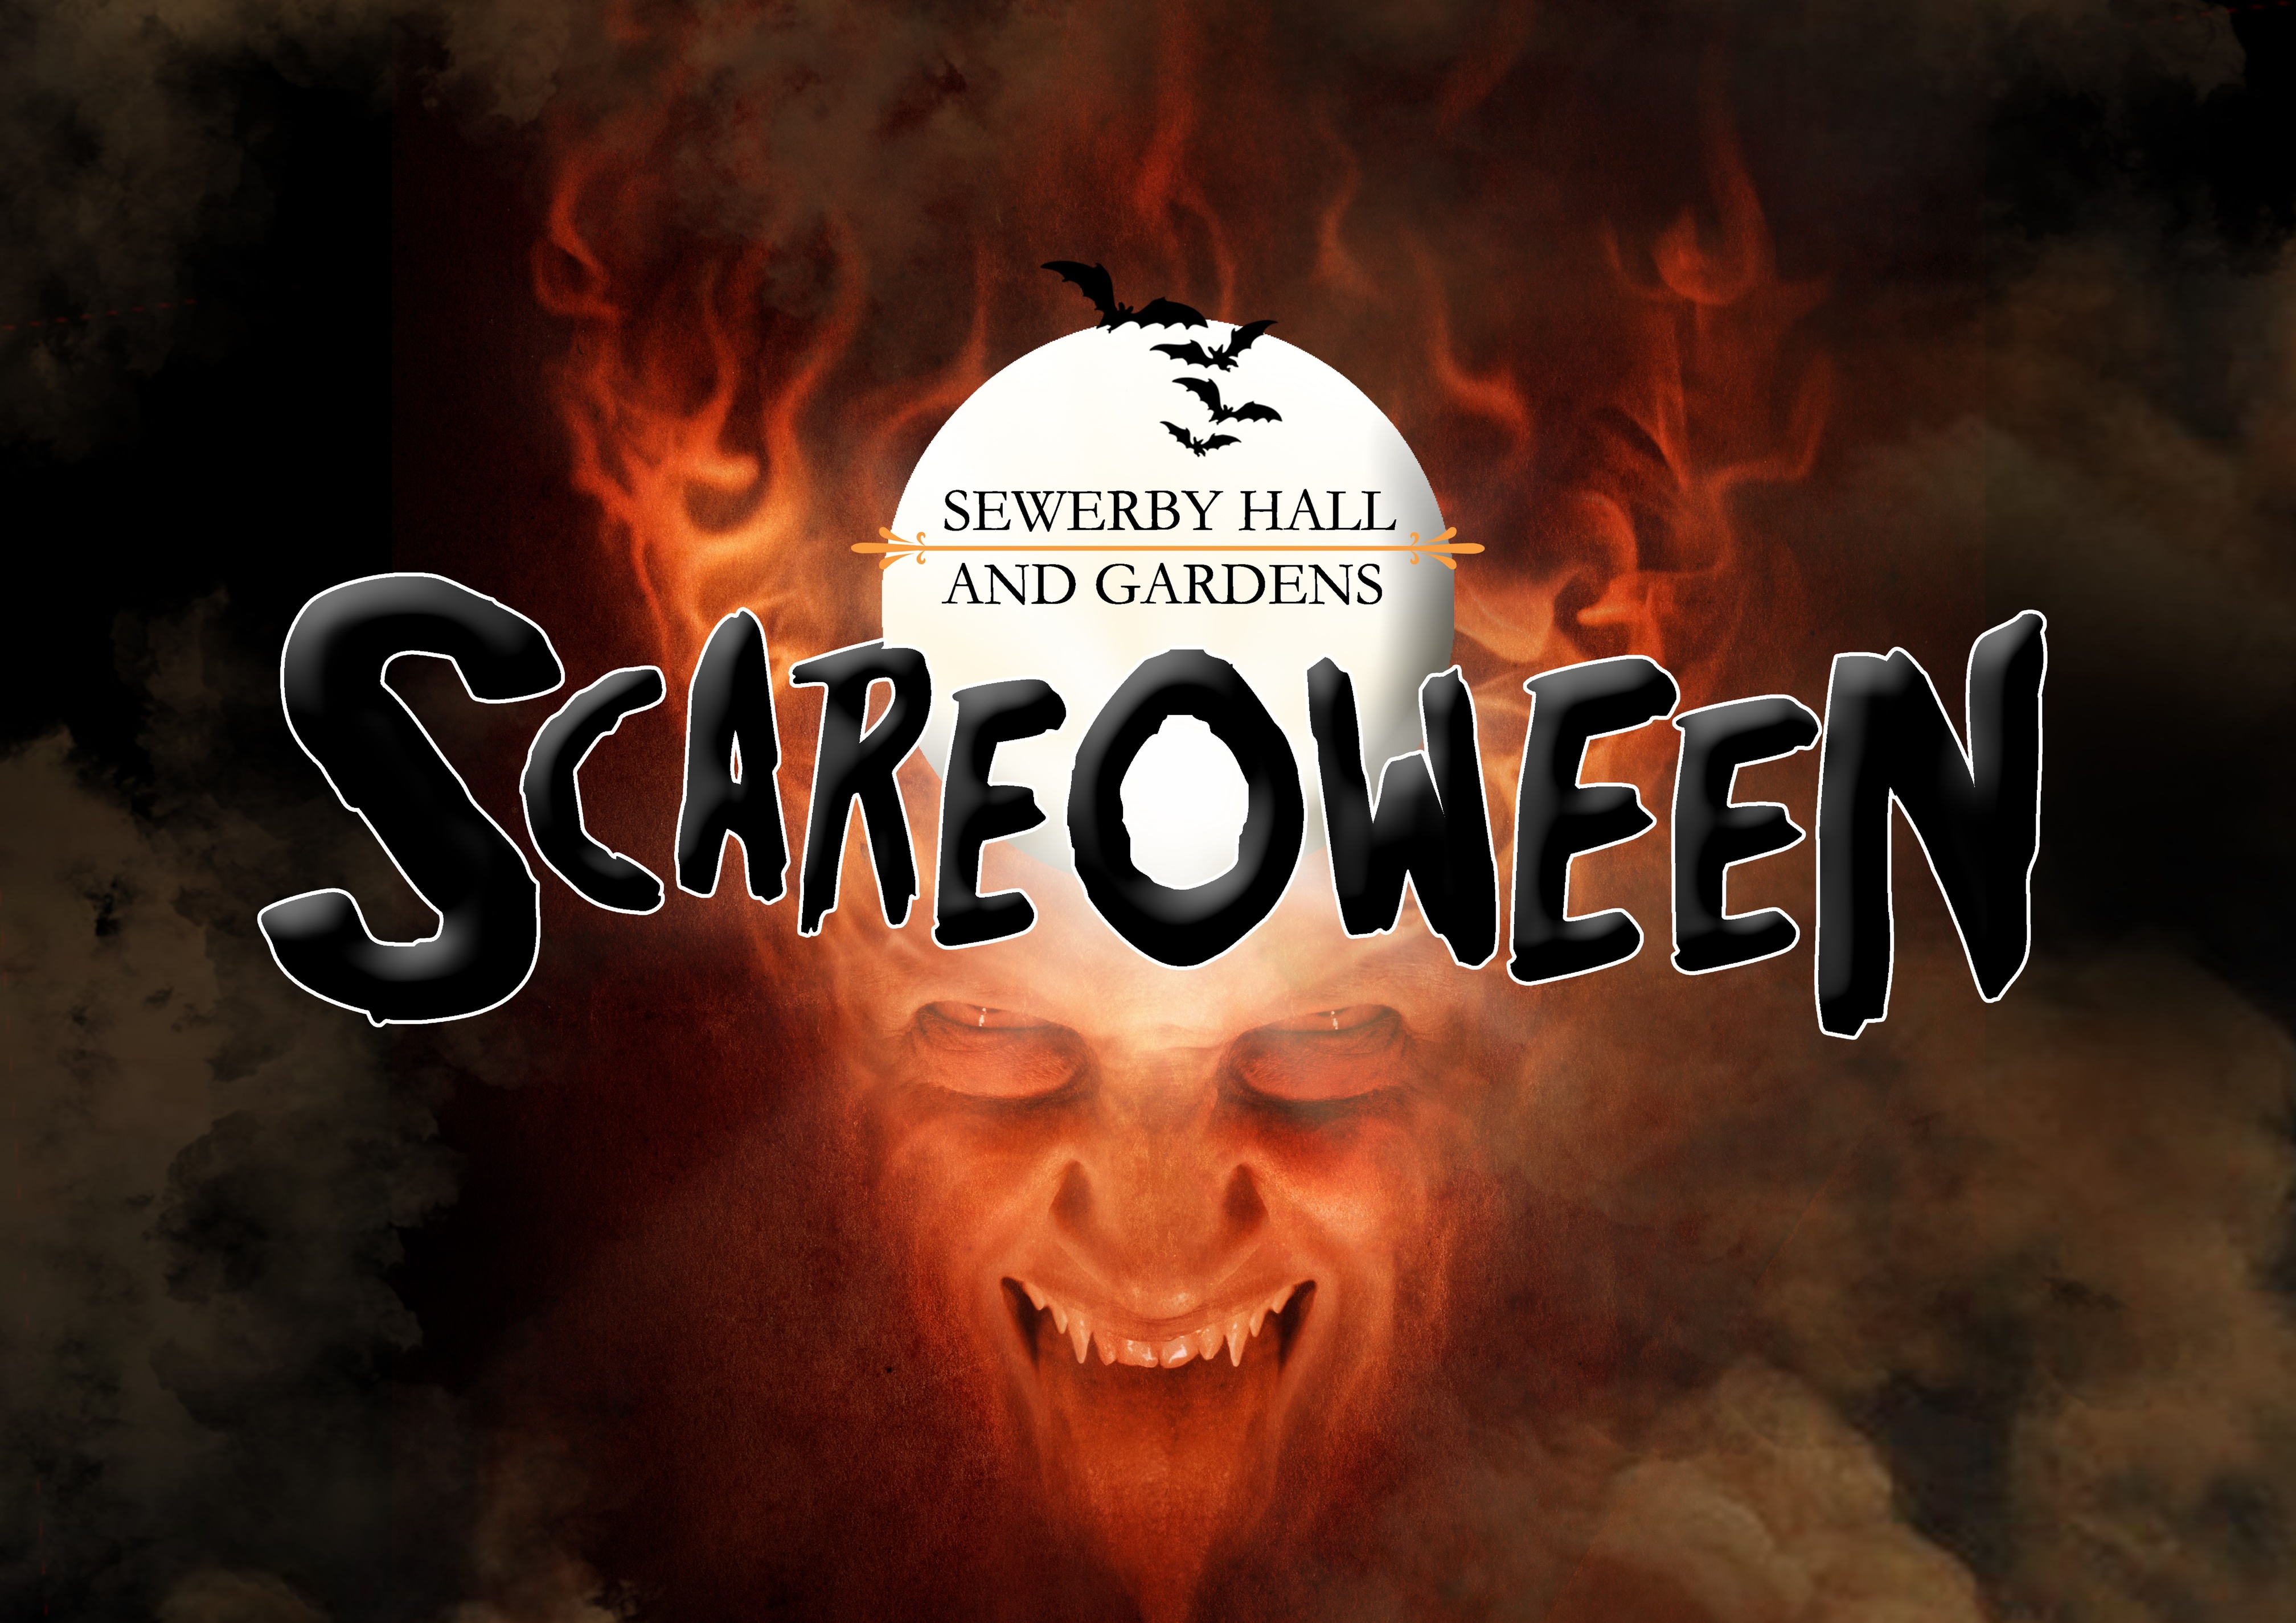 Sewerby Hall Scareoween, spooky deviish face with flame hair and promo text details for halloween at sewerby hall 